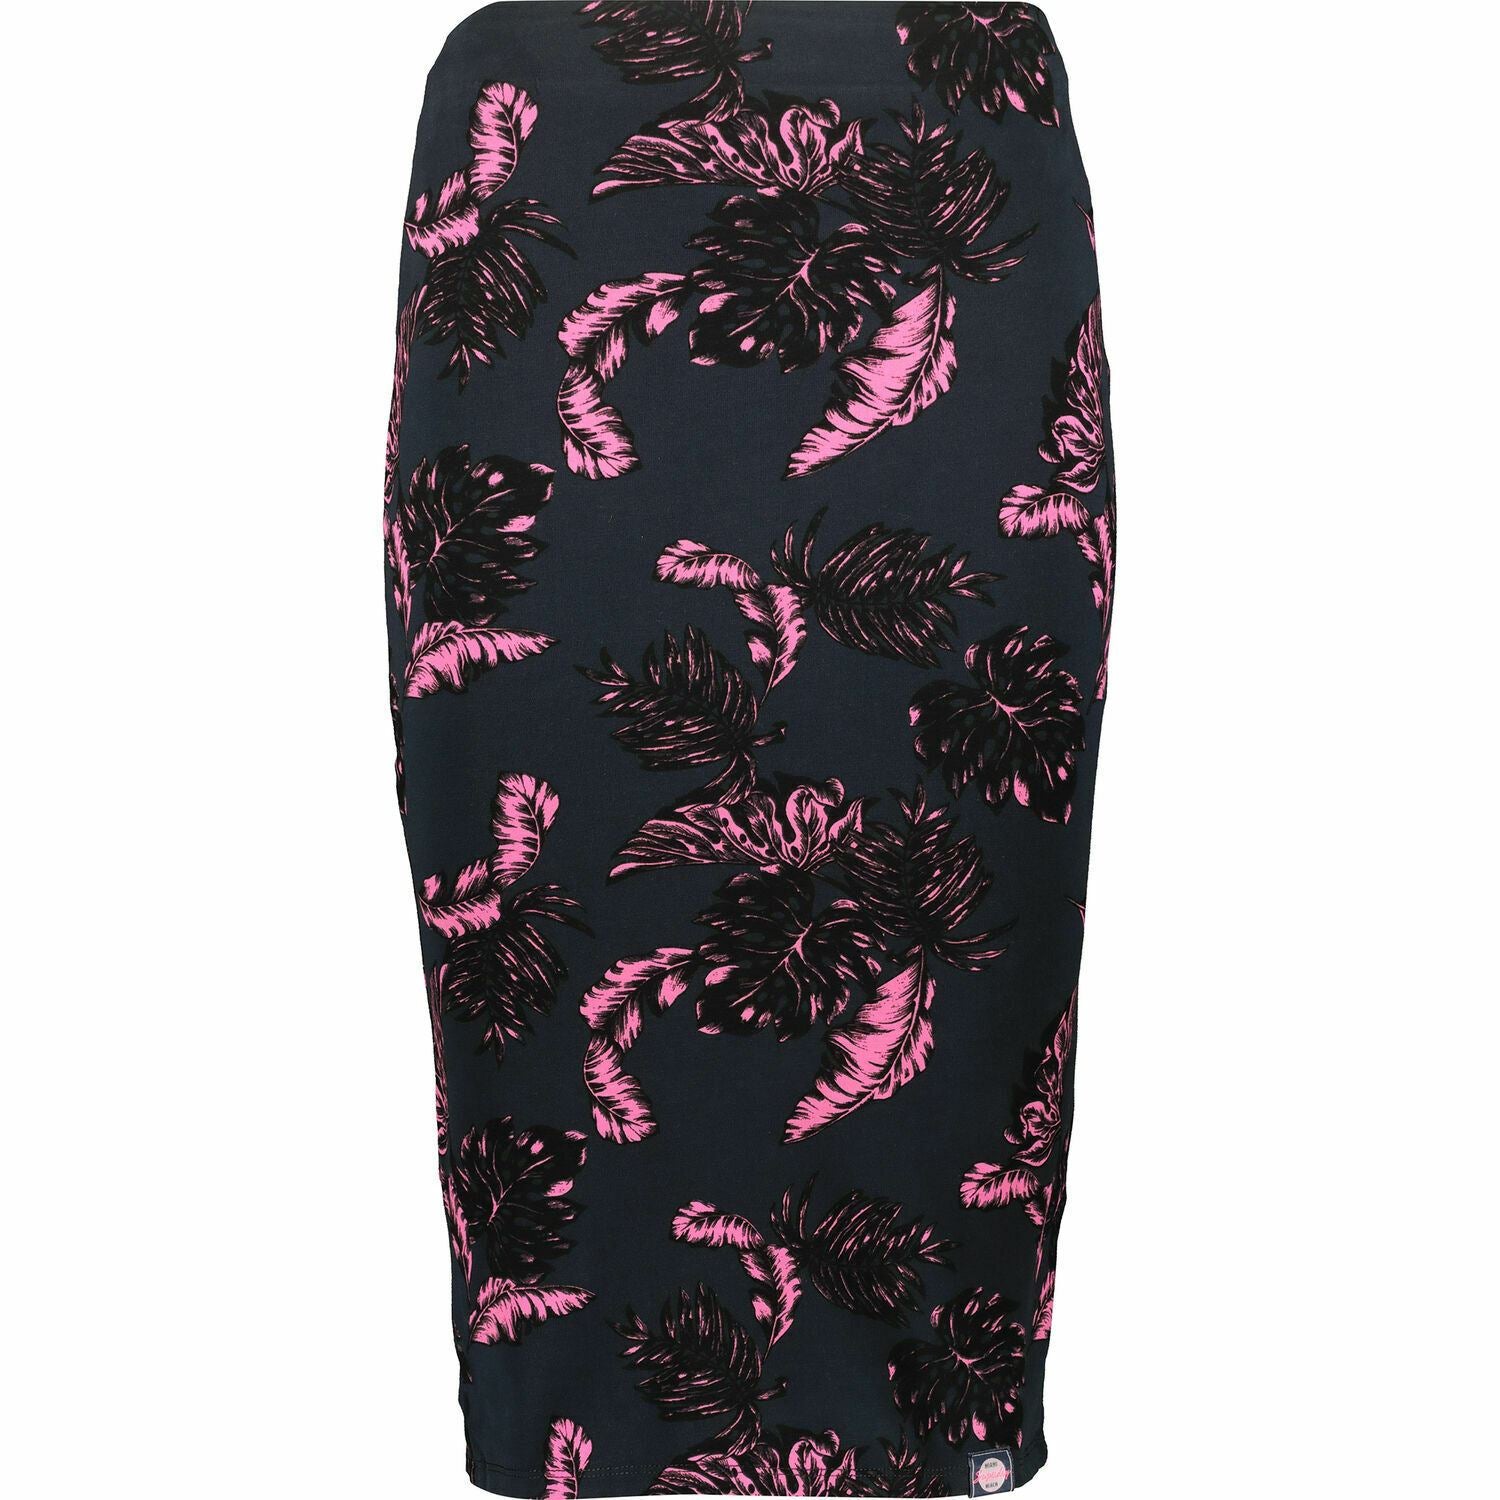 SUPERDRY Women's Beach Leaf Pencil Skirt, Tropical Navy / Pink, size M - UK 12